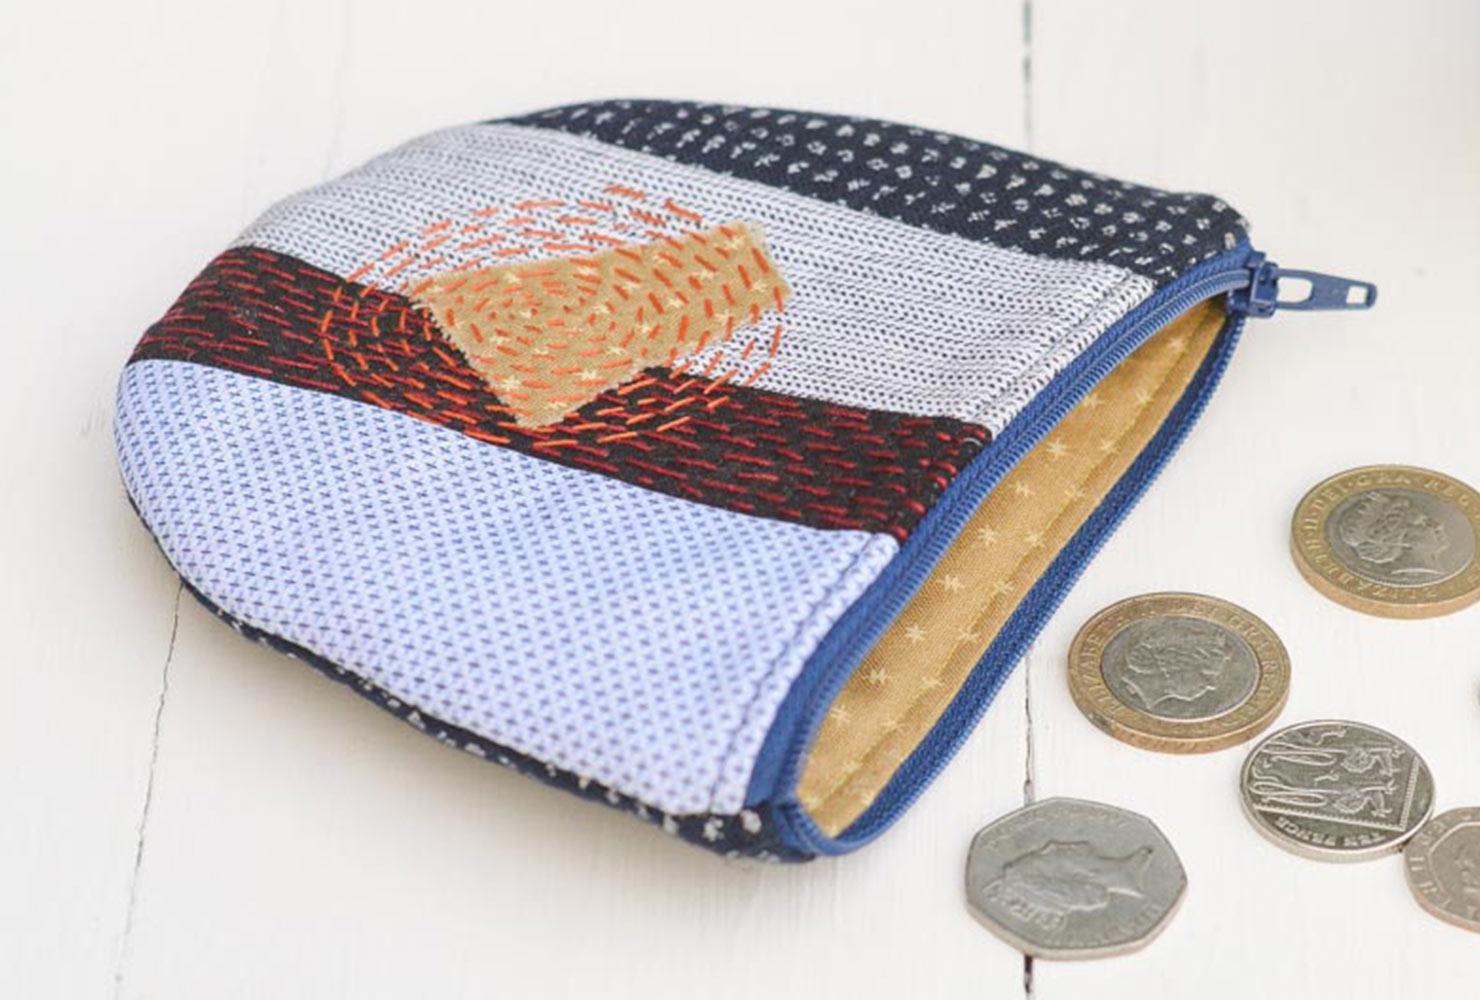 20 gift ideas coin pouch.